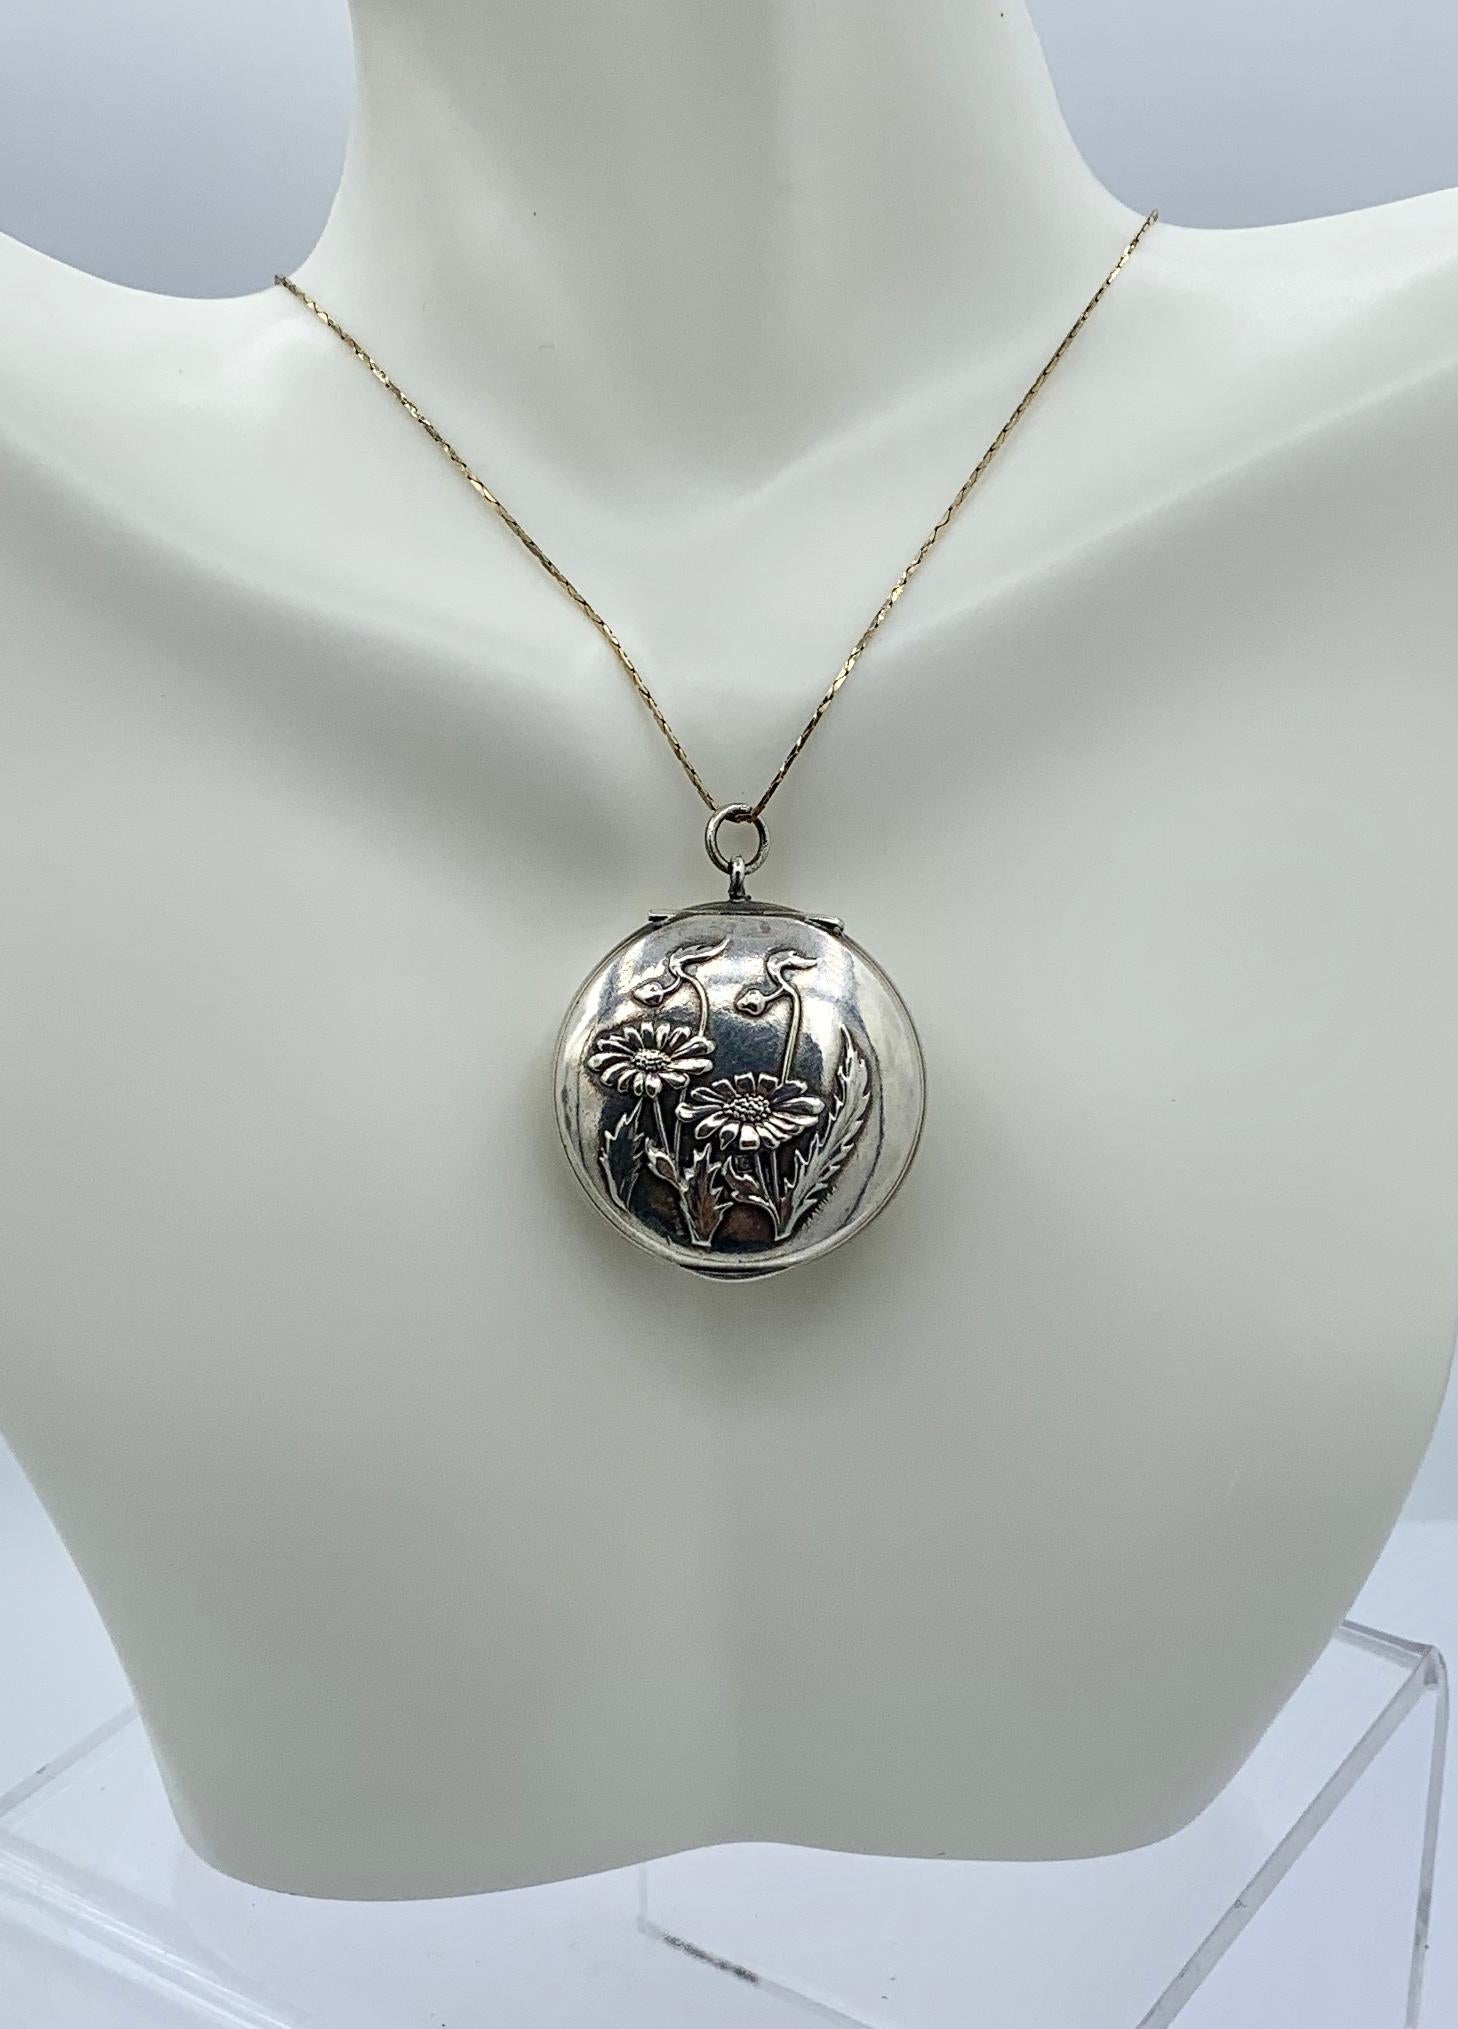 THIS IS A GORGEOUS FRENCH ART NOUVEAU LOCKET PENDANT IN SILVER WITH A BEAUTIFUL REPOUSSE DESIGN OF A FLOWER, LEAF AND BUD MOTIF.
This is just a stunning silver flower motif locket with exquisite Art Nouveau design of daisy flowers.  The reverse of